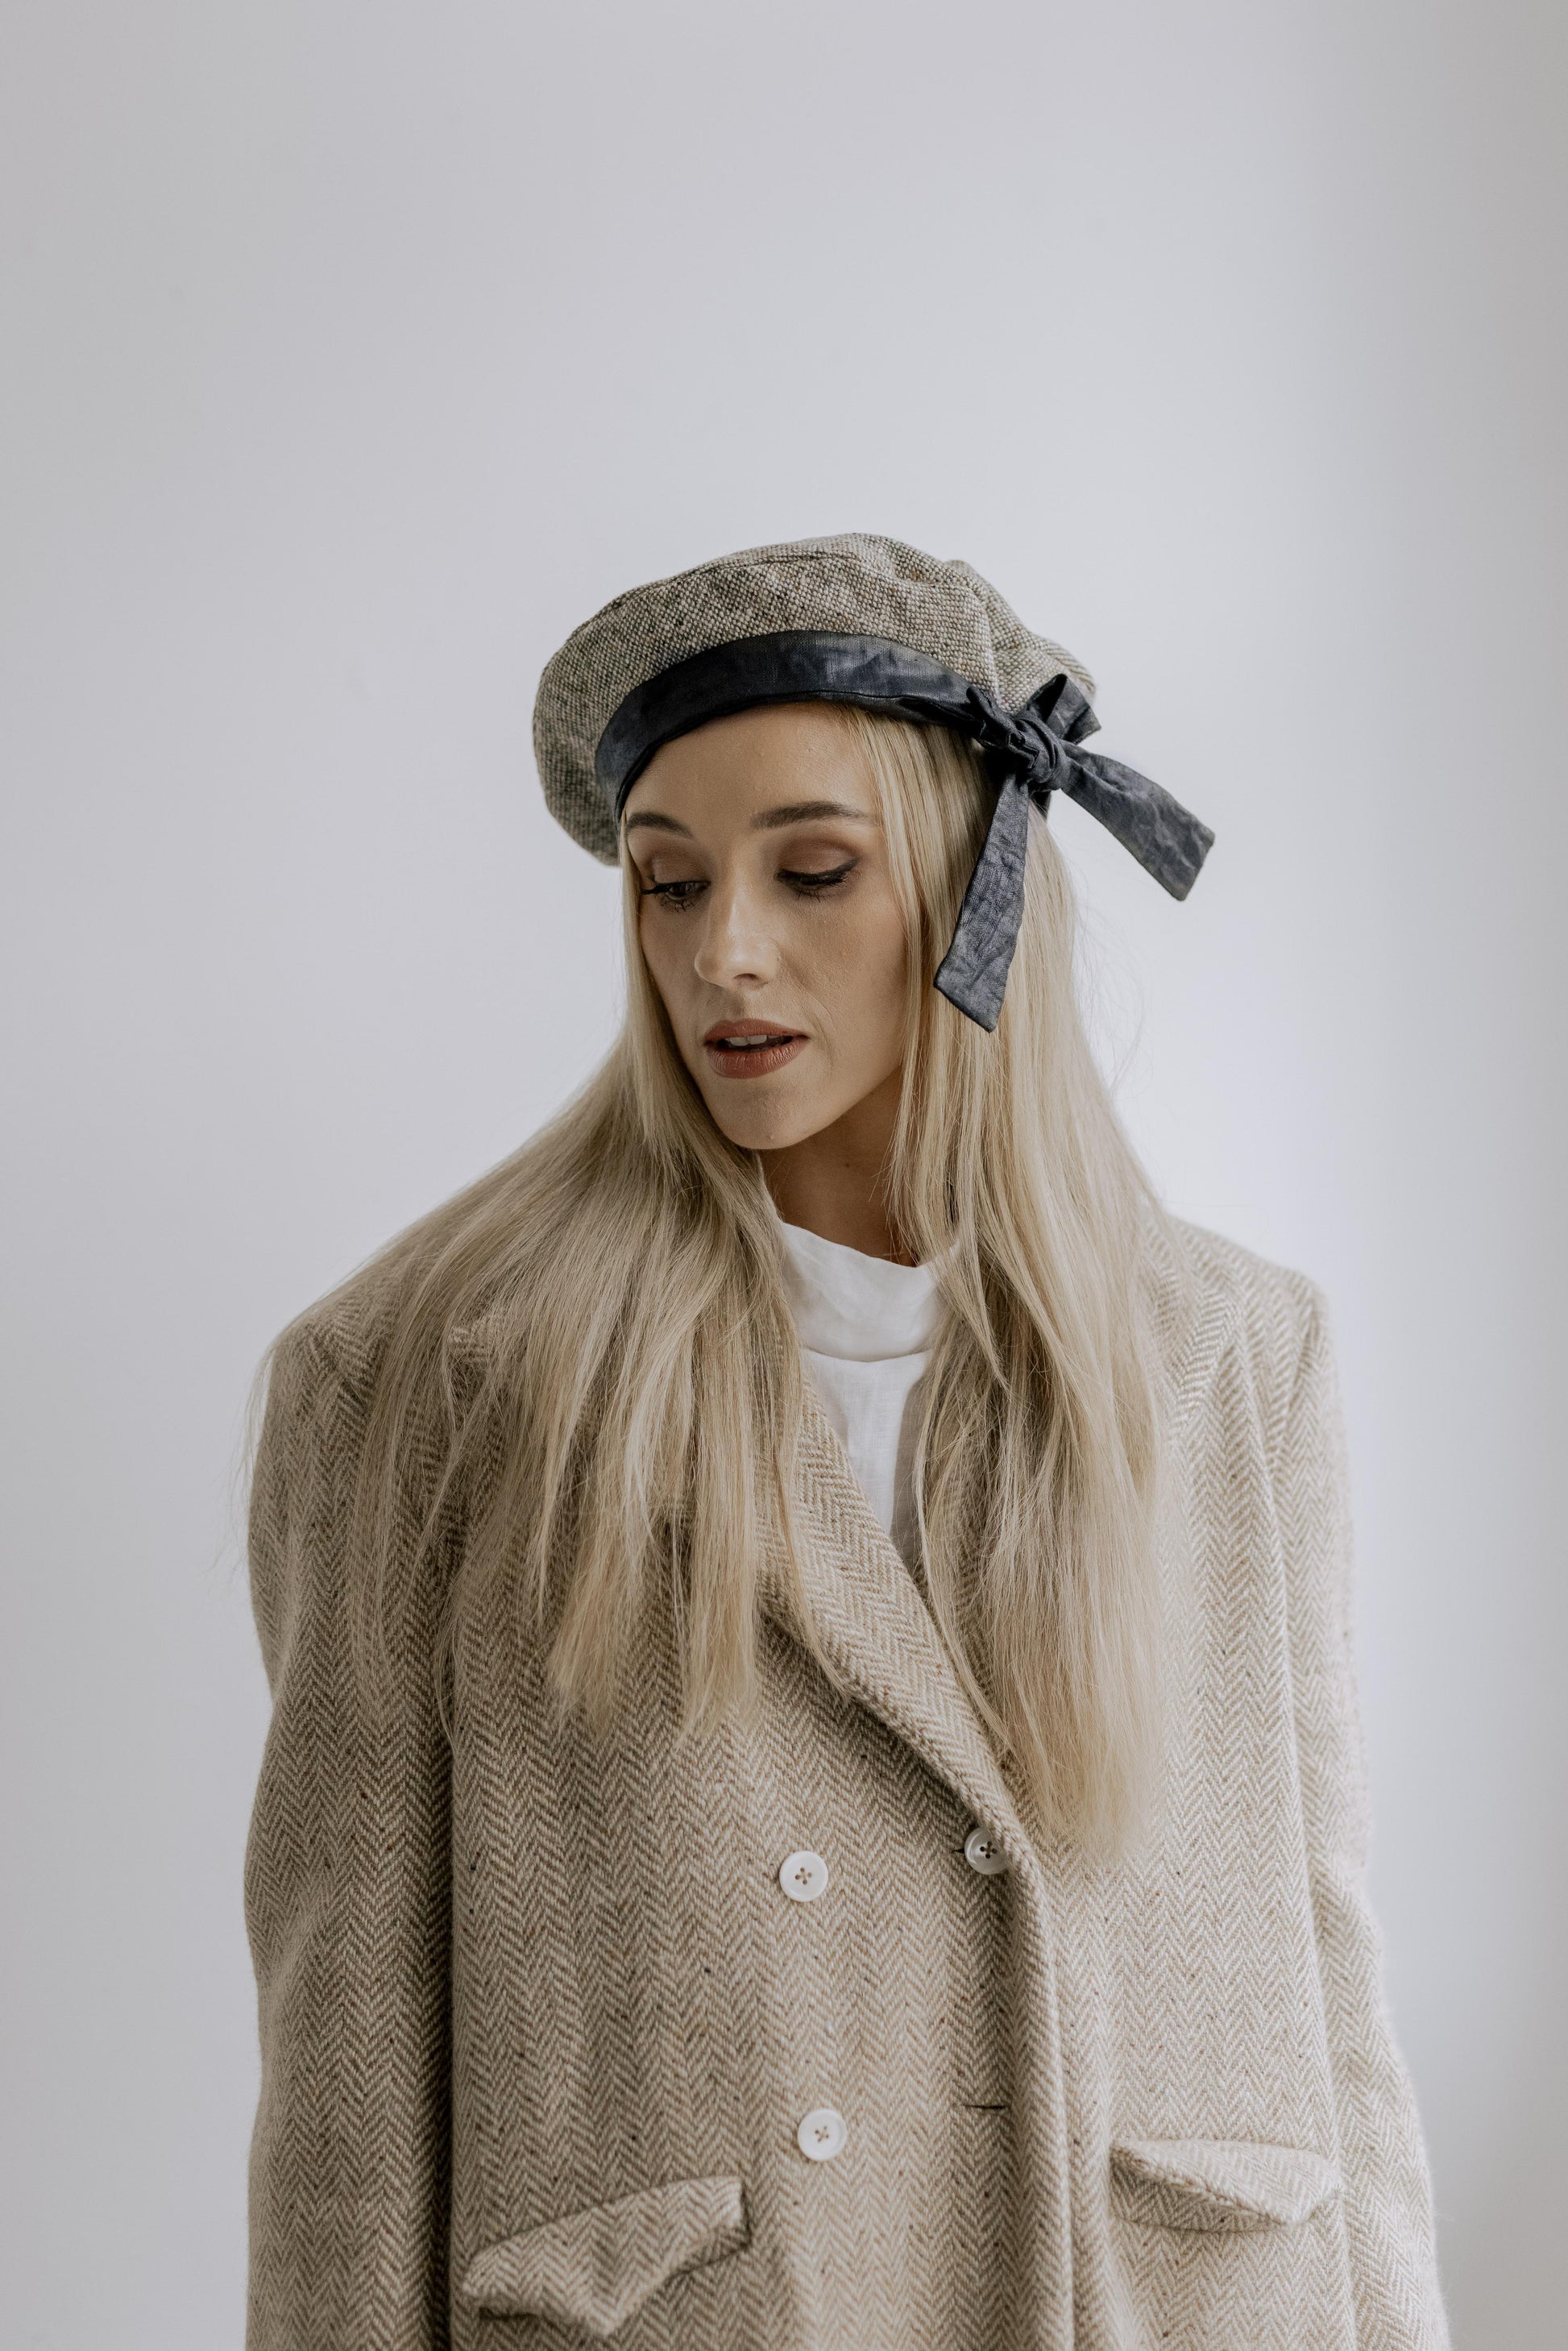 THE BOW BERET | We are so delighted to introduce a big new step for us as a brand by introducing Donegal Tweed to our core collection. An expansion of our deep love and passion for Irish textiles and keeping our rich heritage alive- originating in Co Done